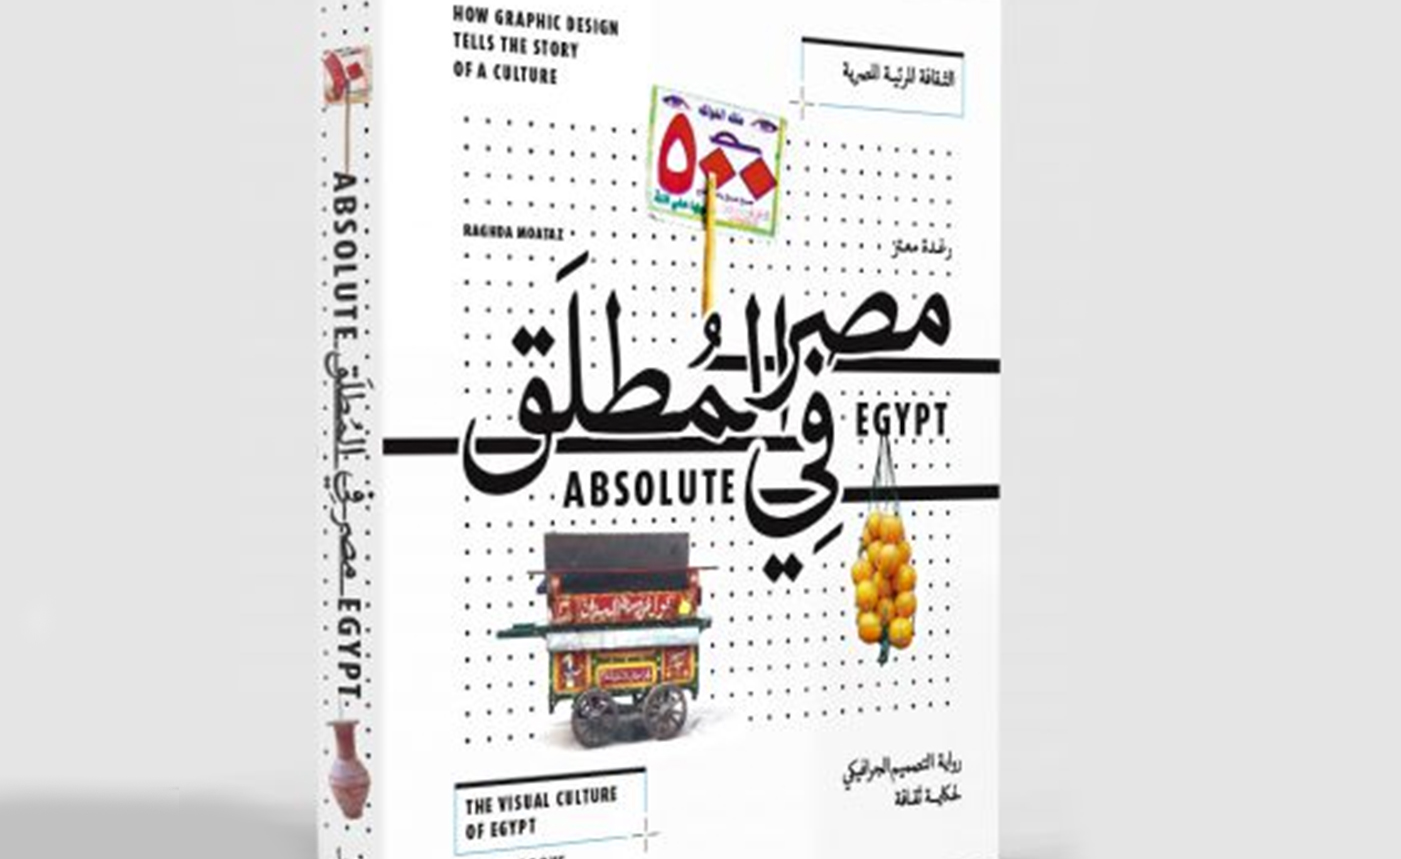 'Absolute Egypt' is a Love Letter to Our Streets' Unique Visual Identity